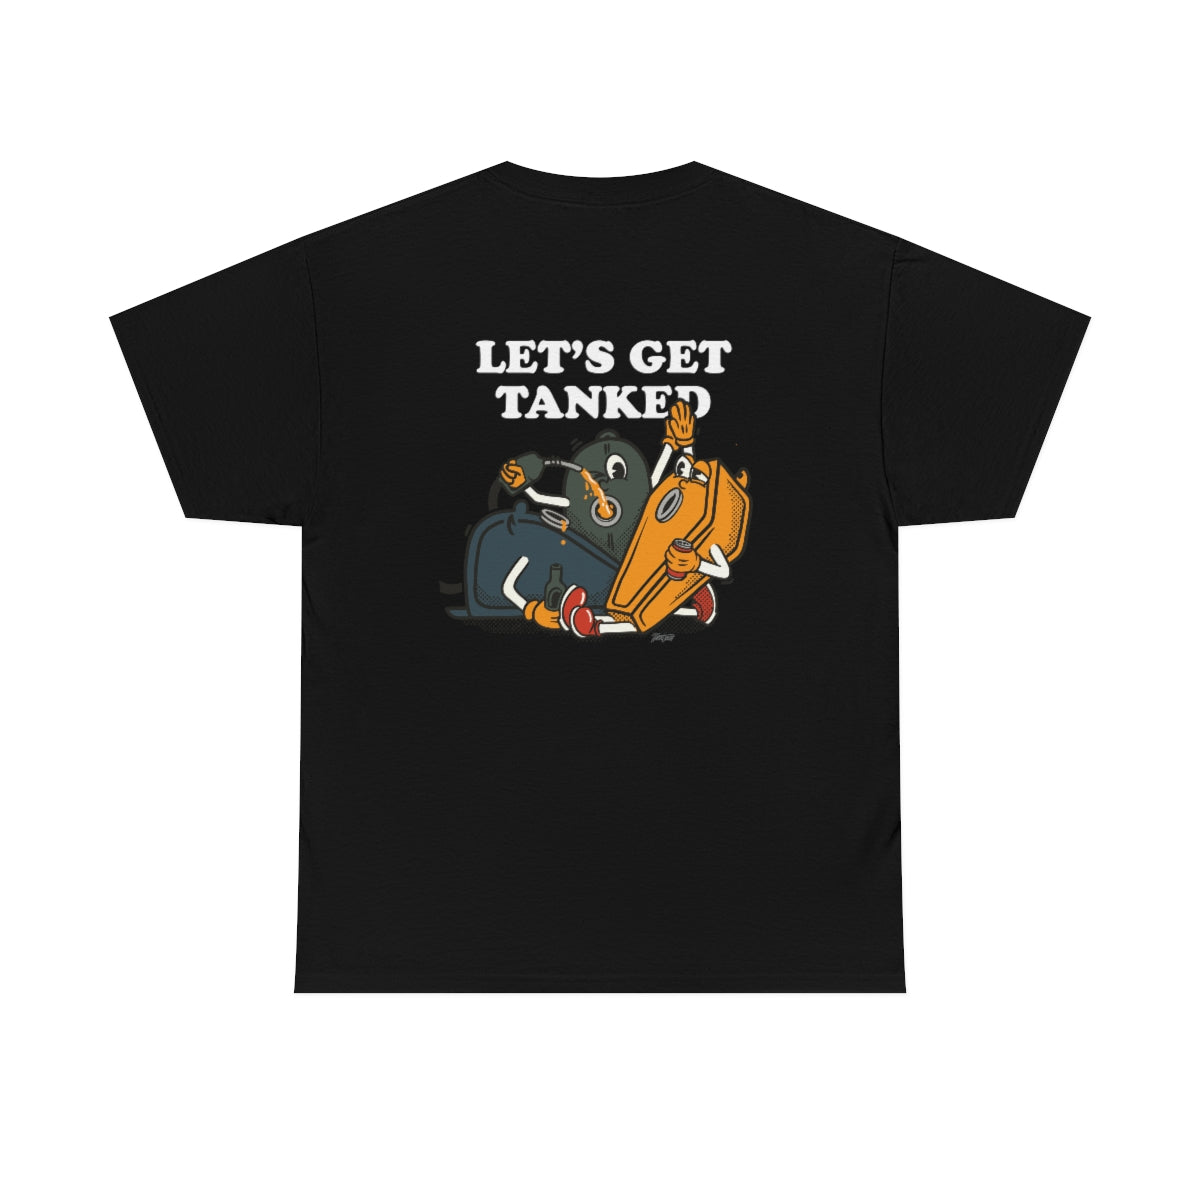 Lets Get Tanked - Unisex Tee